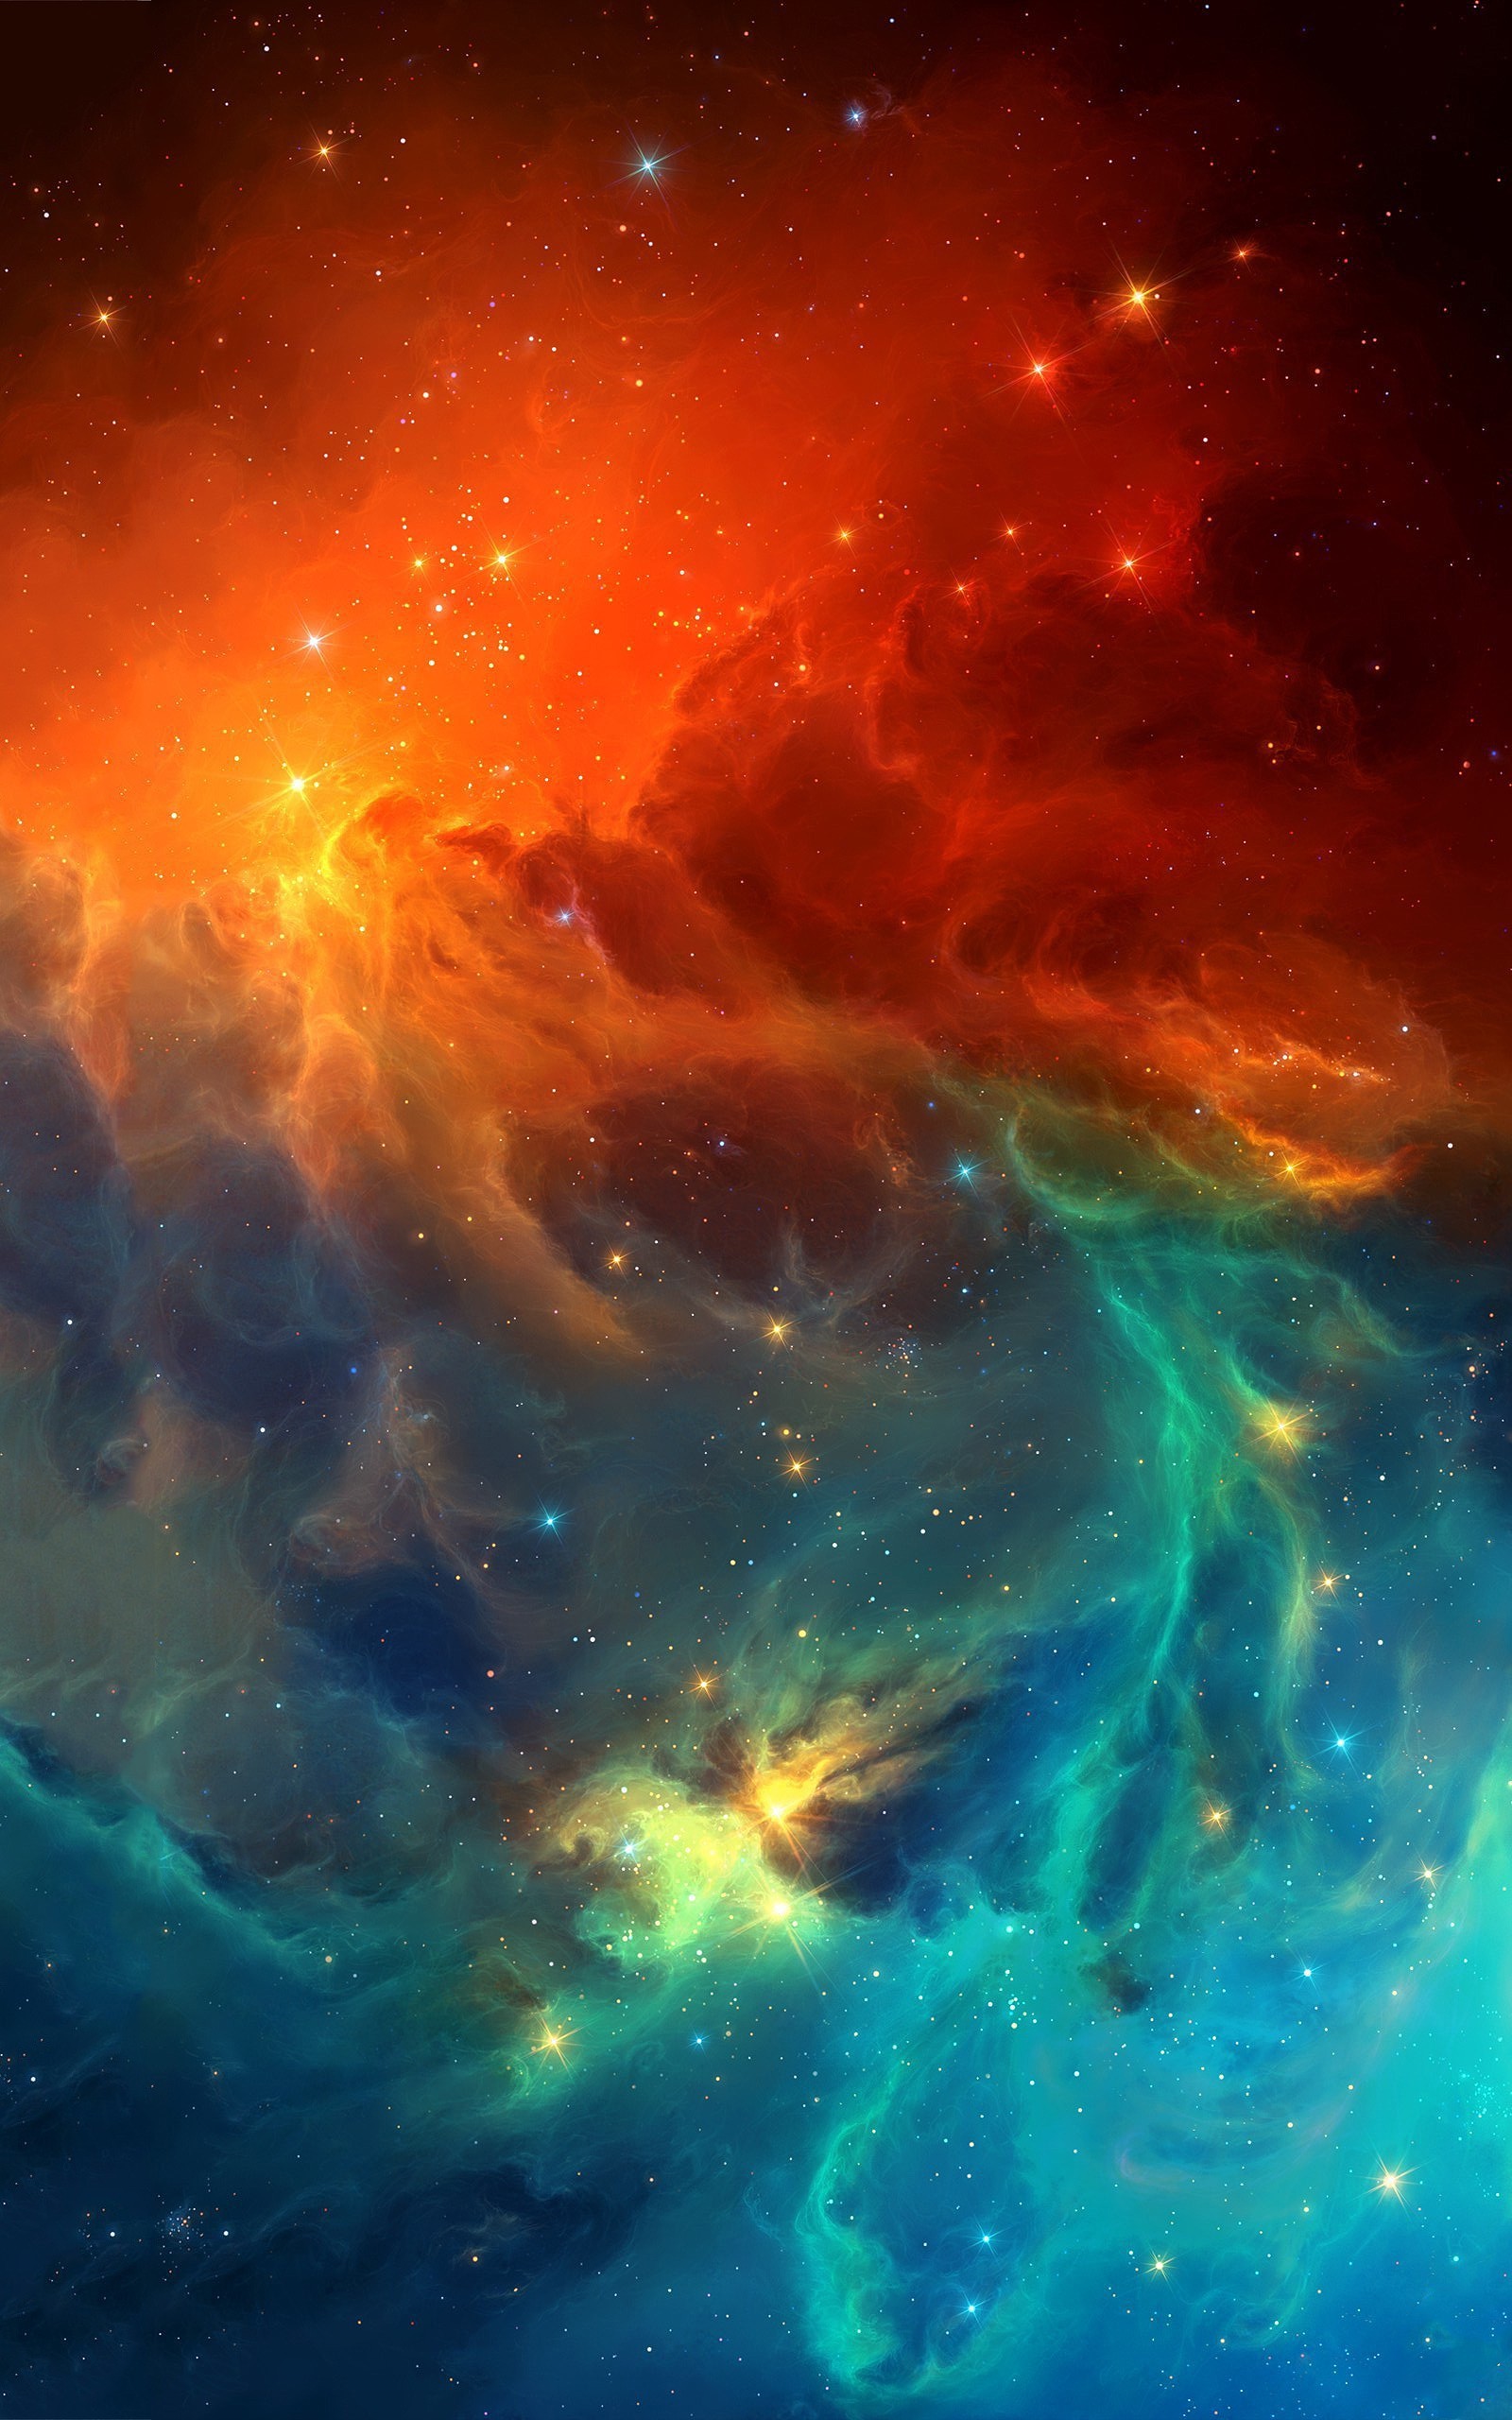 hd wallpaper for mobile 1920x1080 download,nebula,sky,outer space,geological phenomenon,atmosphere